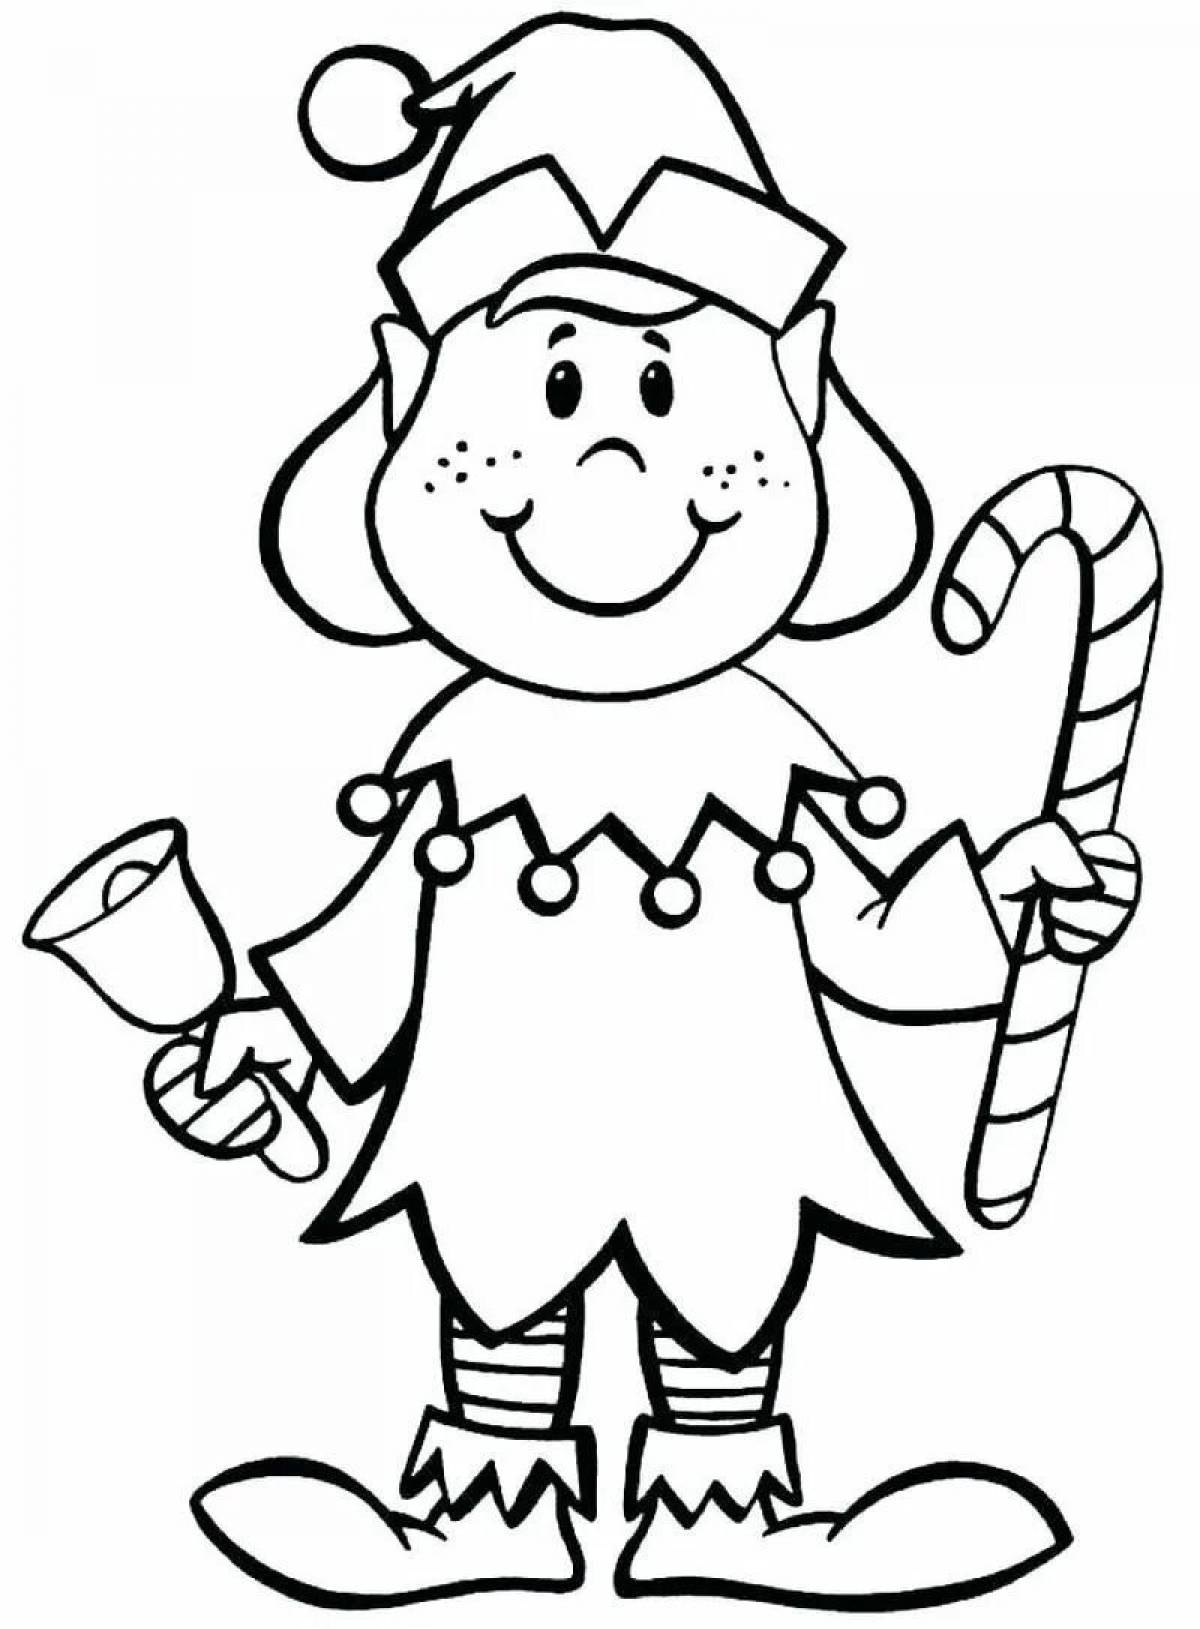 Christmas Elf Coloring Page Christmas Elf Coloring Pages ...